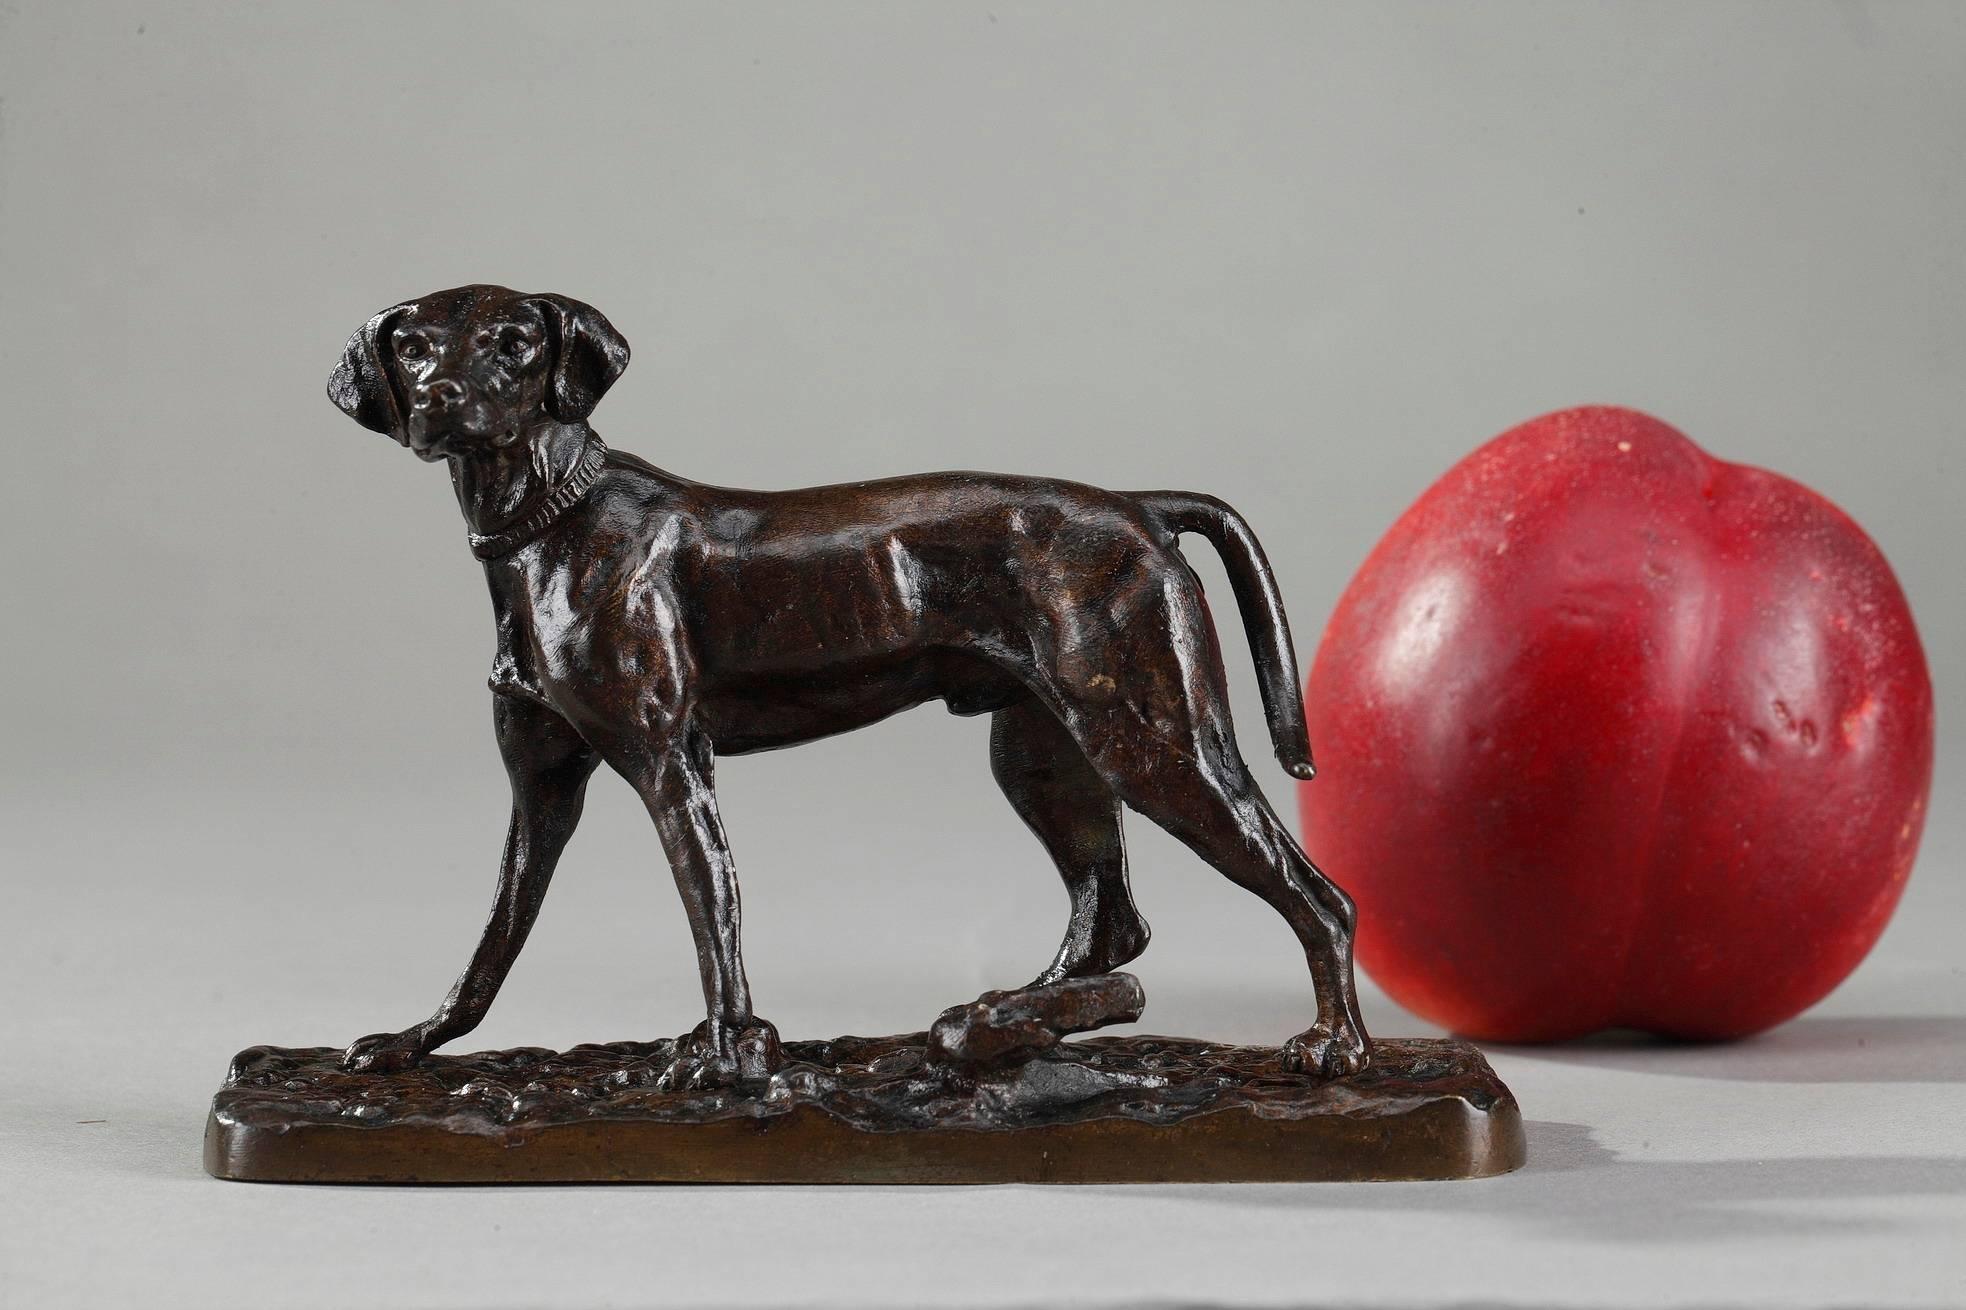 Small bronze animal sculpture with brown patina featuring a spaniel set atop a naturalistic base. The spaniel is a hunting dog developed to assist hunters in finding and retrieving game, usually birds. Signed on the base: P.J. MENE. Antique bronze